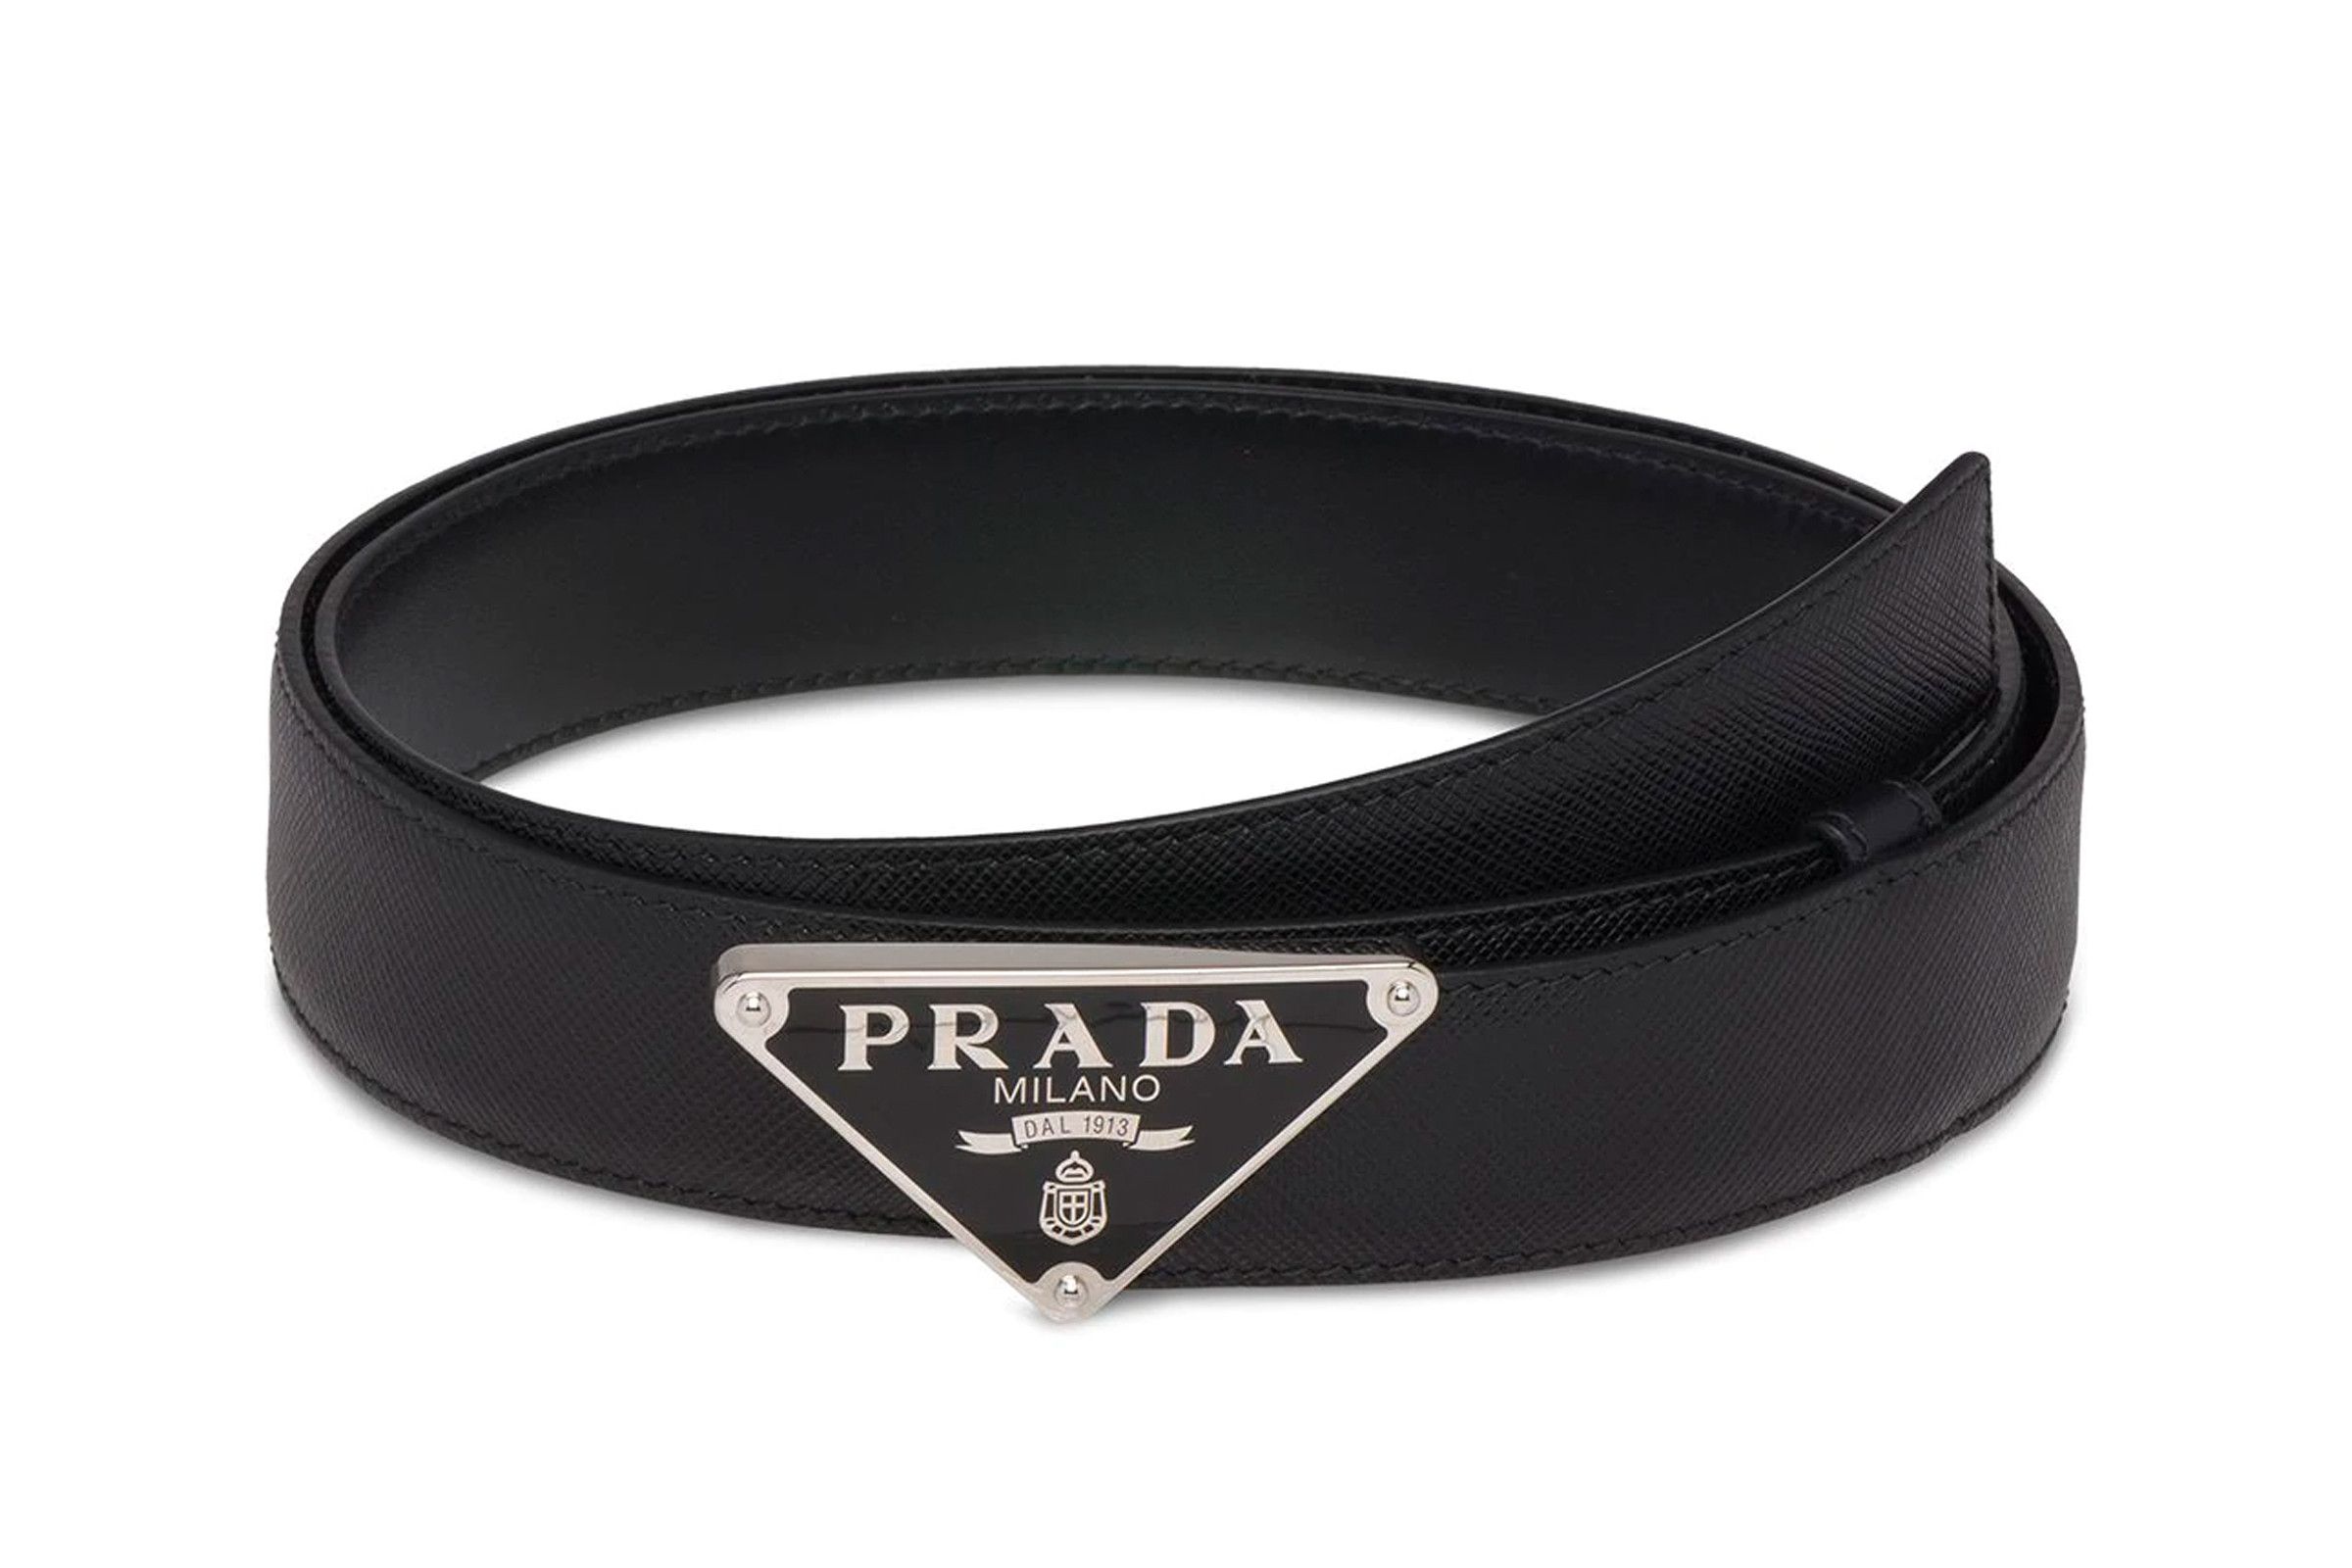 Luxury Mens Designer Belt With Smooth Buckle, Brand Logo, And High